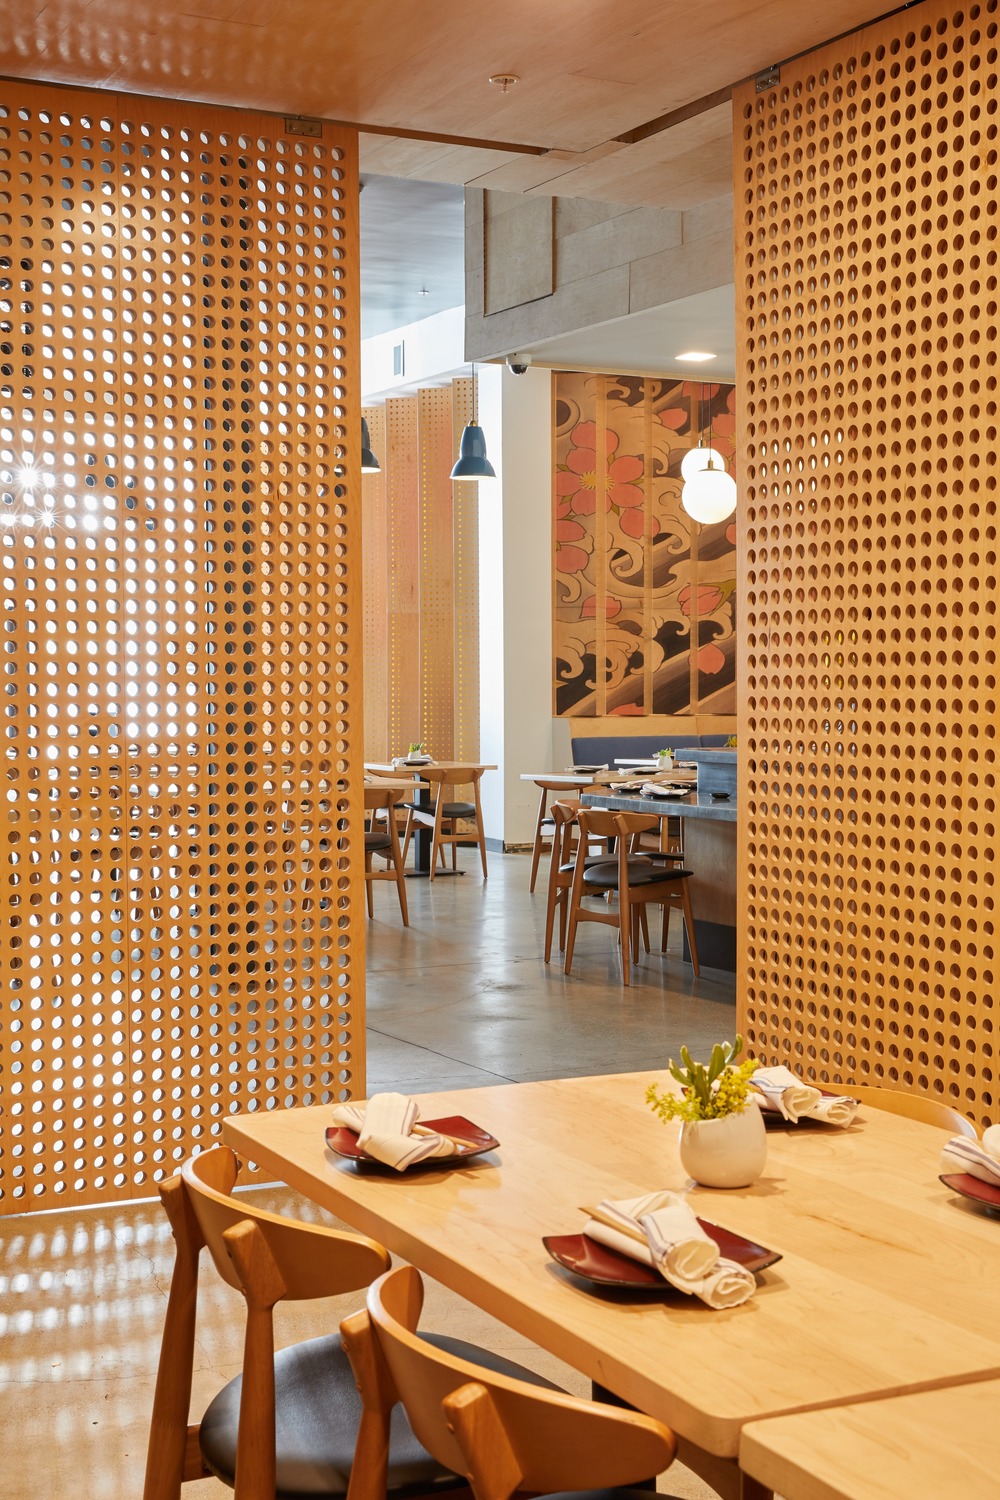 Perforated plywood screens